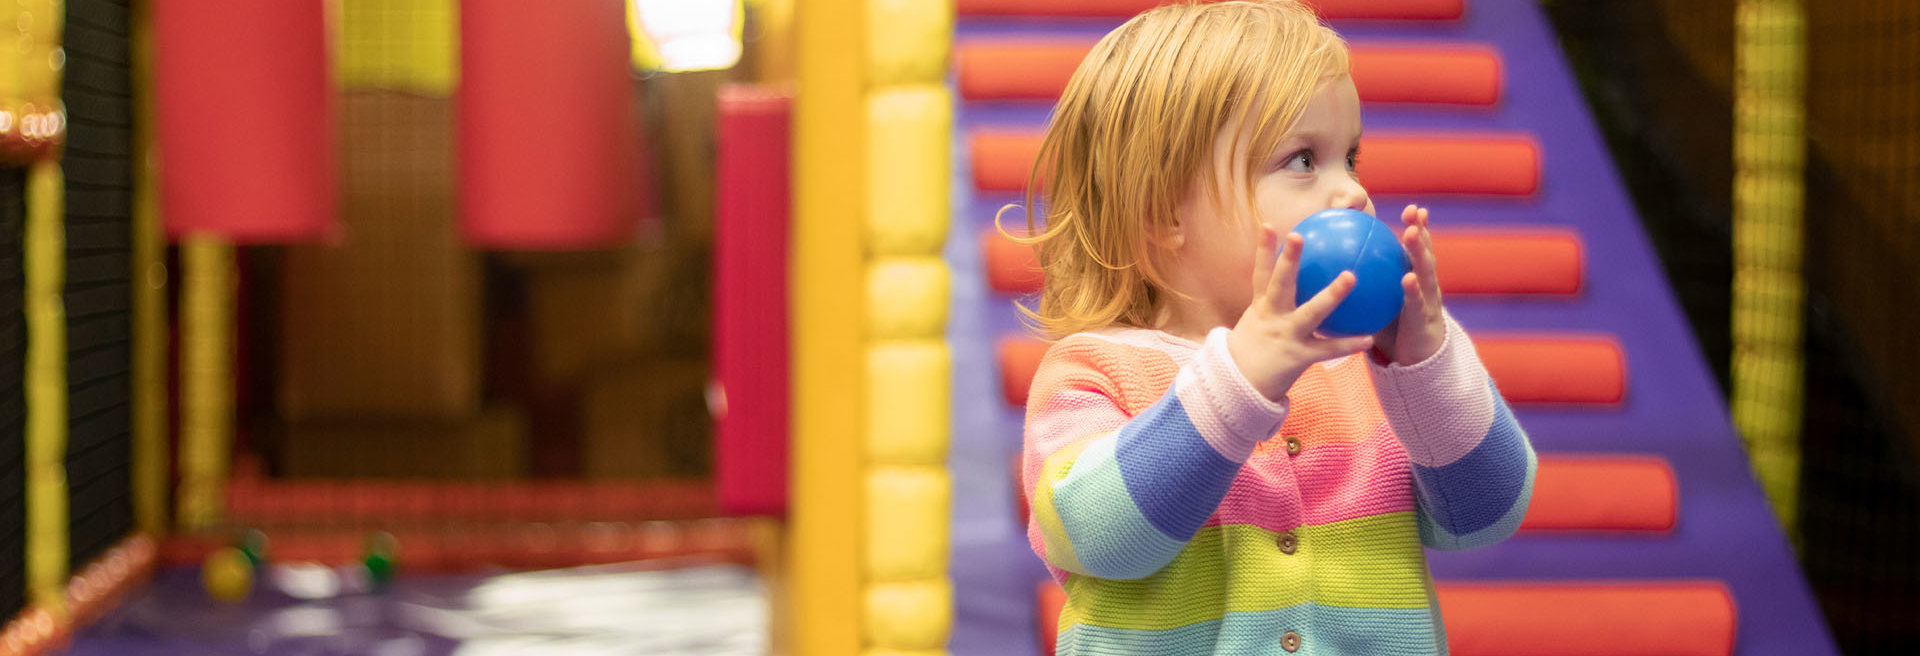 Young girl holding a blue ball and playing in soft play at namco funscape